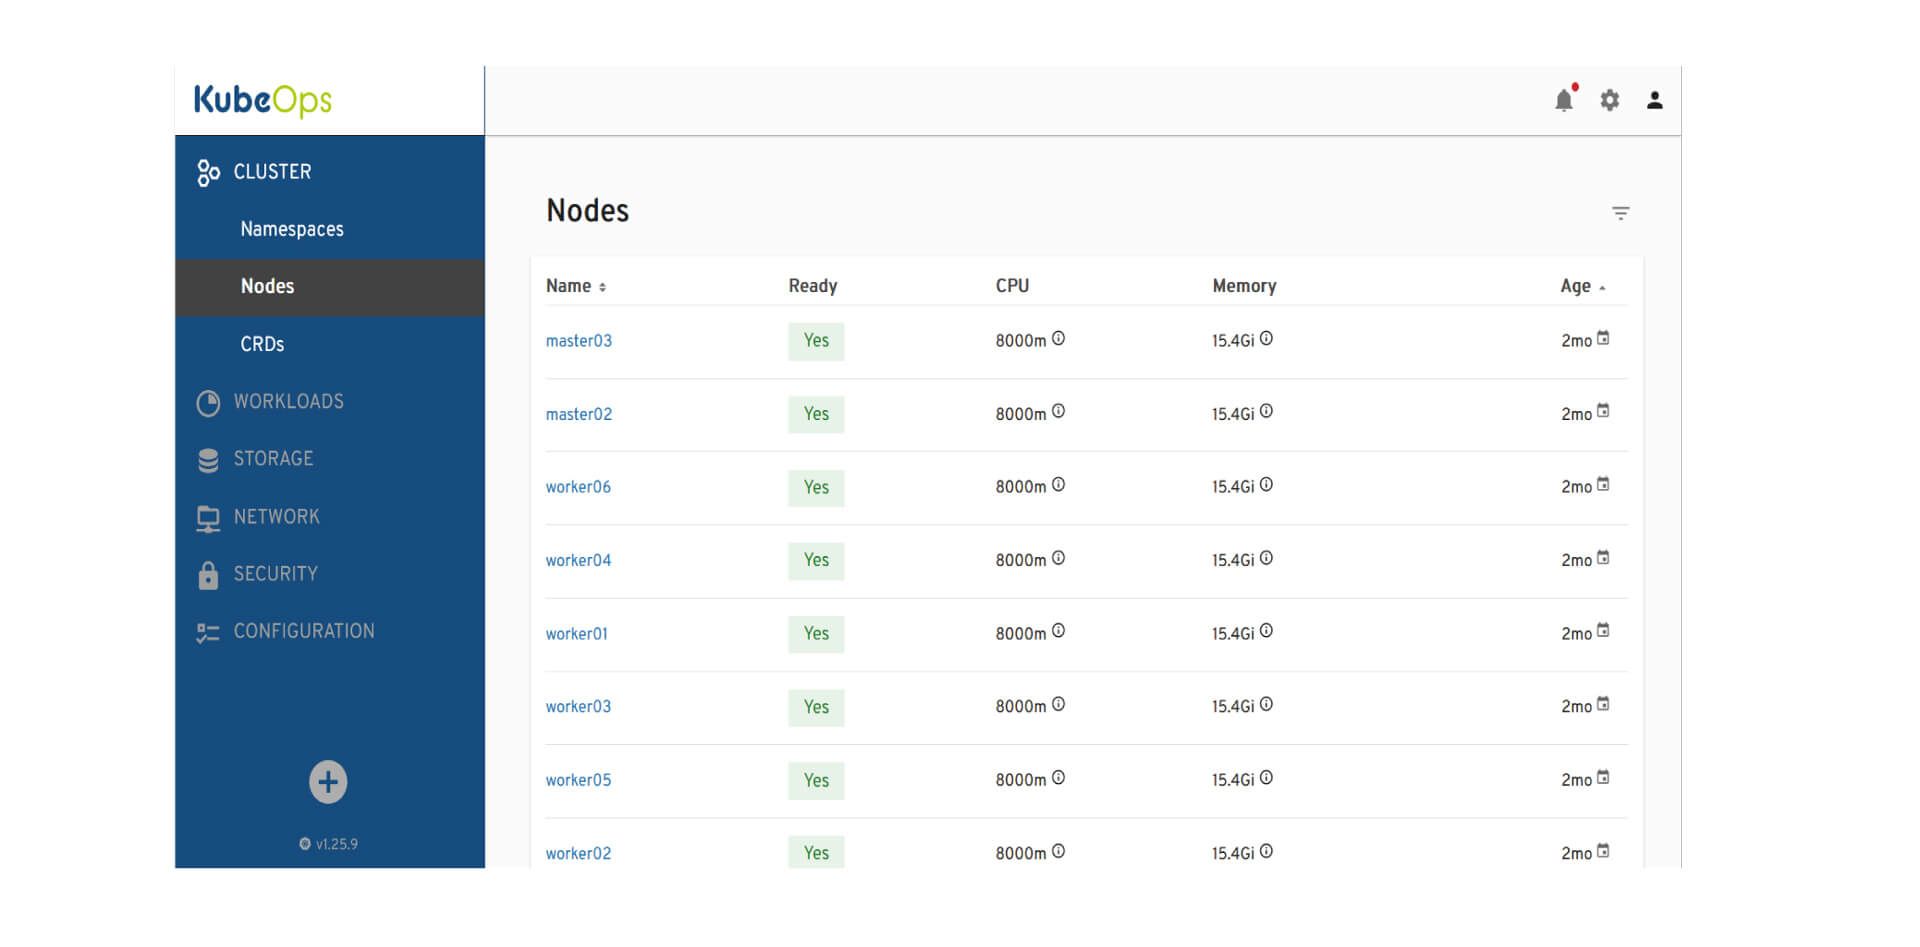 The image is a screenshot of the KubeOps dashboard displaying the "Nodes" section of a Kubernetes cluster. The left sidebar highlights the "Nodes" menu item, with other items including "Namespaces", "CRDs", "Workloads", "Storage", "Network", "Security", and "Configuration" listed above and below. The main pane lists Kubernetes nodes with columns for "Name", "Ready" status, "CPU" resources, "Memory" usage, and "Age" of the node. Each node is marked as "Yes" under the Ready column, indicating they are operational, with CPU resources allocated at 8000m and memory at 15.4Gi. The age of all nodes listed is 2 months. The interface has a clean, modern design with a blue and white color scheme.